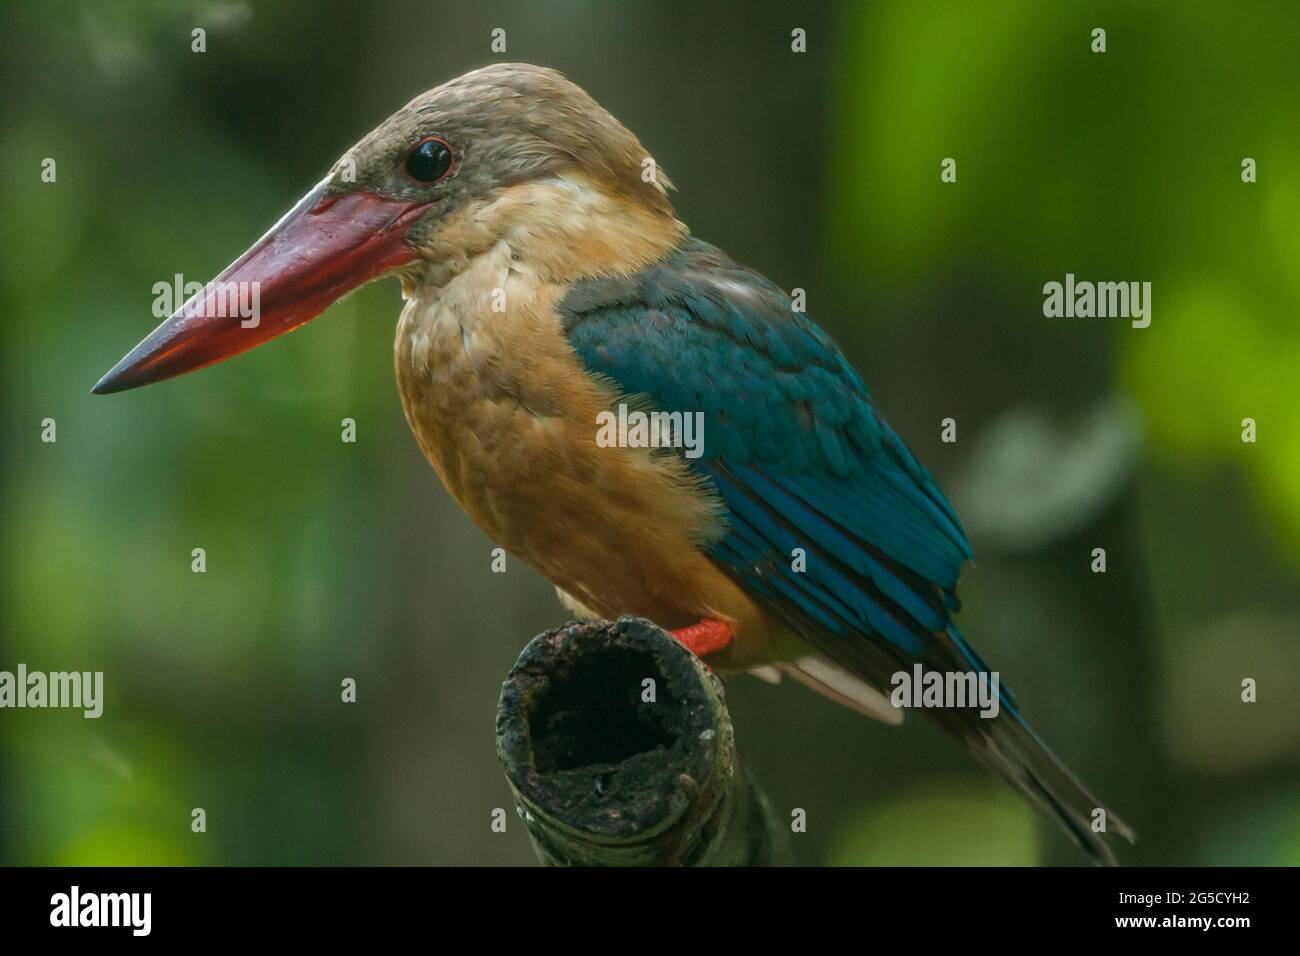 Stork-billed Kingfisher (Pelargopsis capensis) with large scarlet bill found predominantly in south asia and the Indian sub-continent. Stock Photo